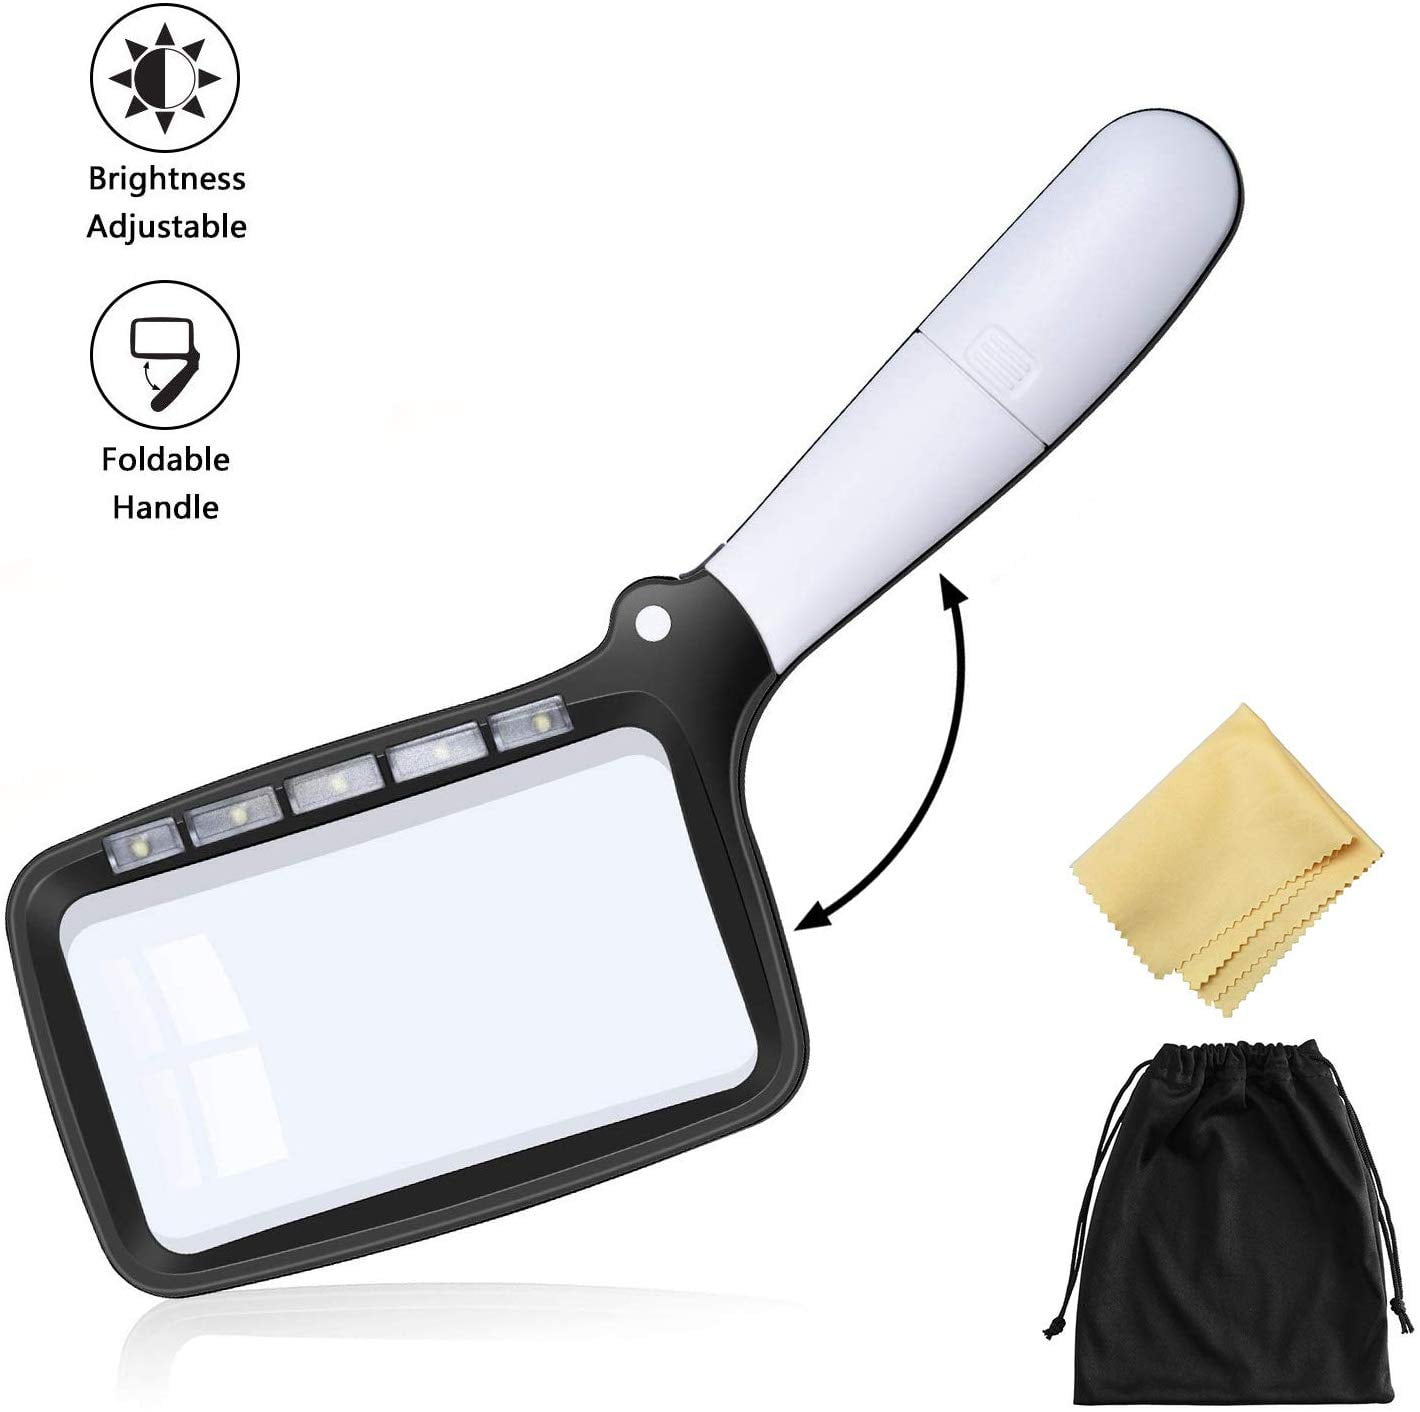 LSNLNN Magnifying Glasses,Magnifying Glass with Light Elderly Children Reading Magnifier Handheld Portable Maintenance Identification Tool 4X 10X Double Hd Lens with 4 Led Lamps for Maps Jewellery C 